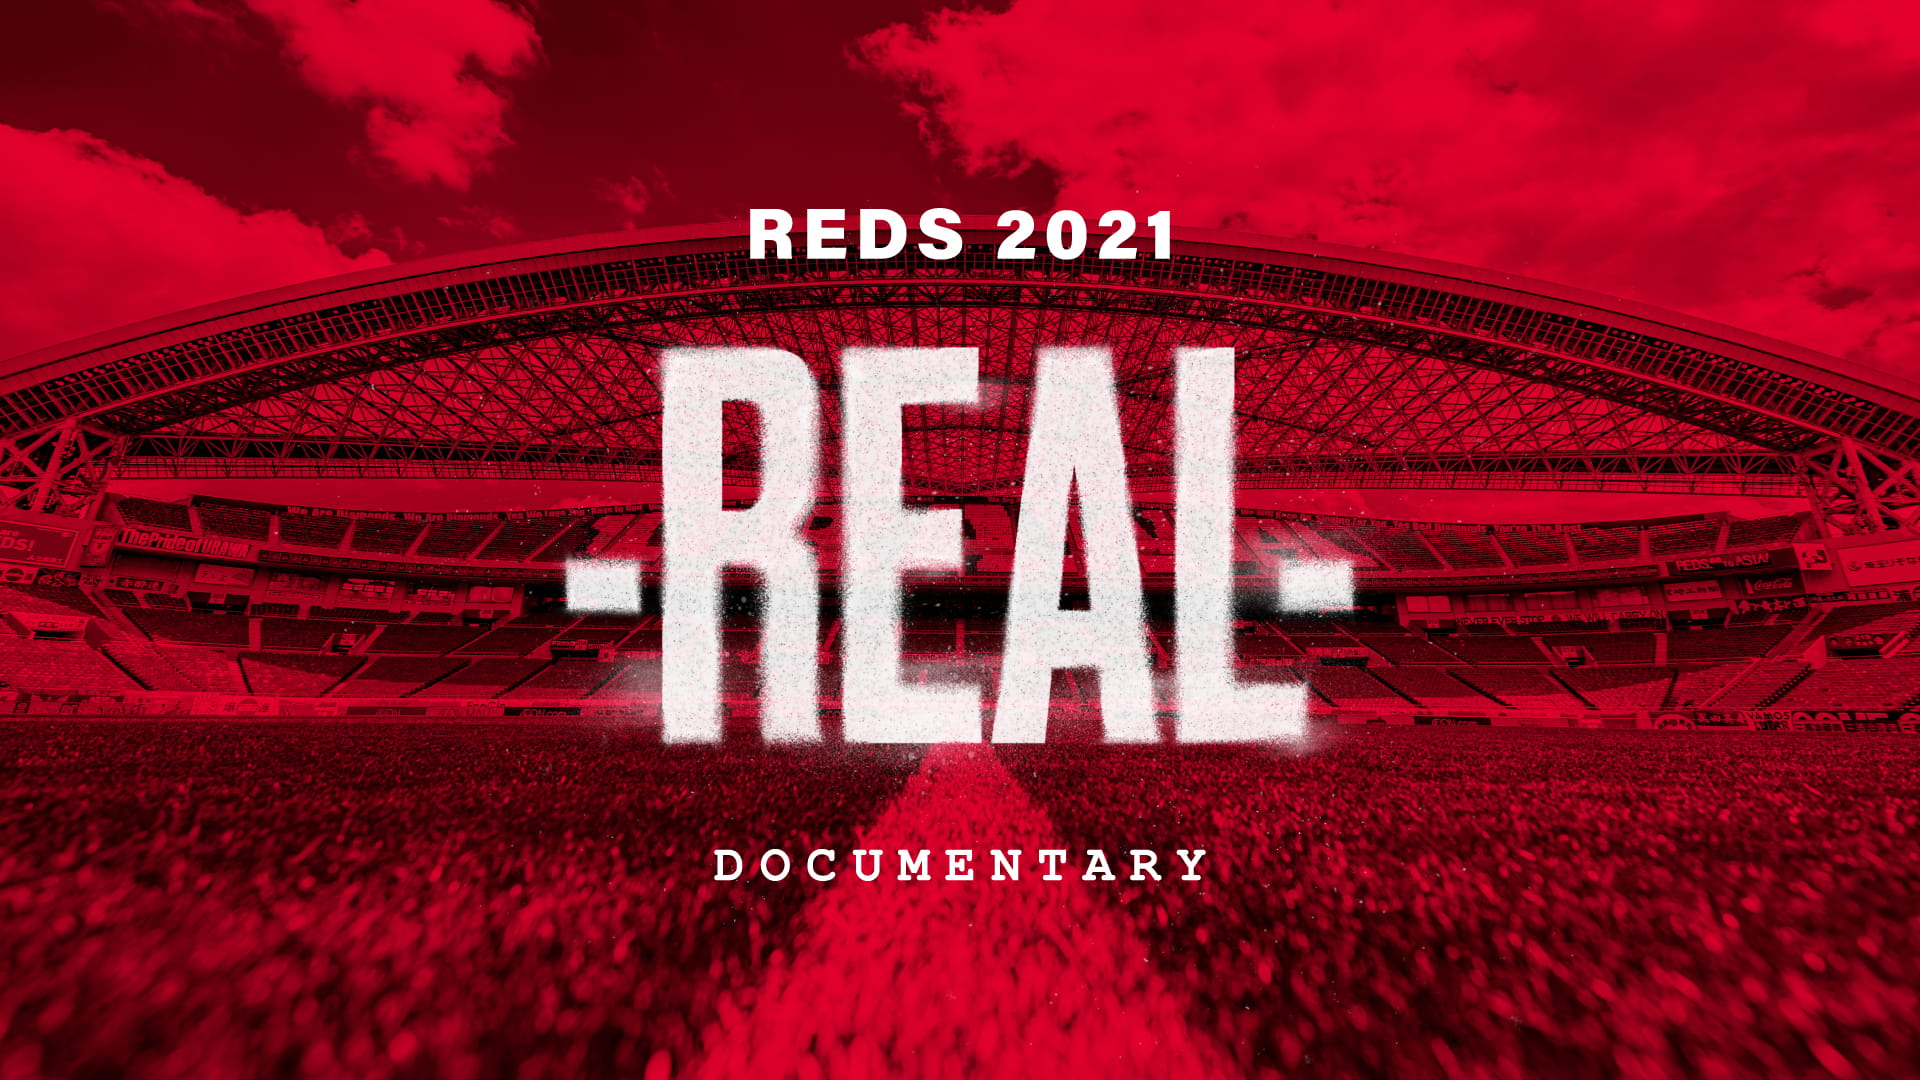 REDS 2021 -REAL- DOCUMENTARY